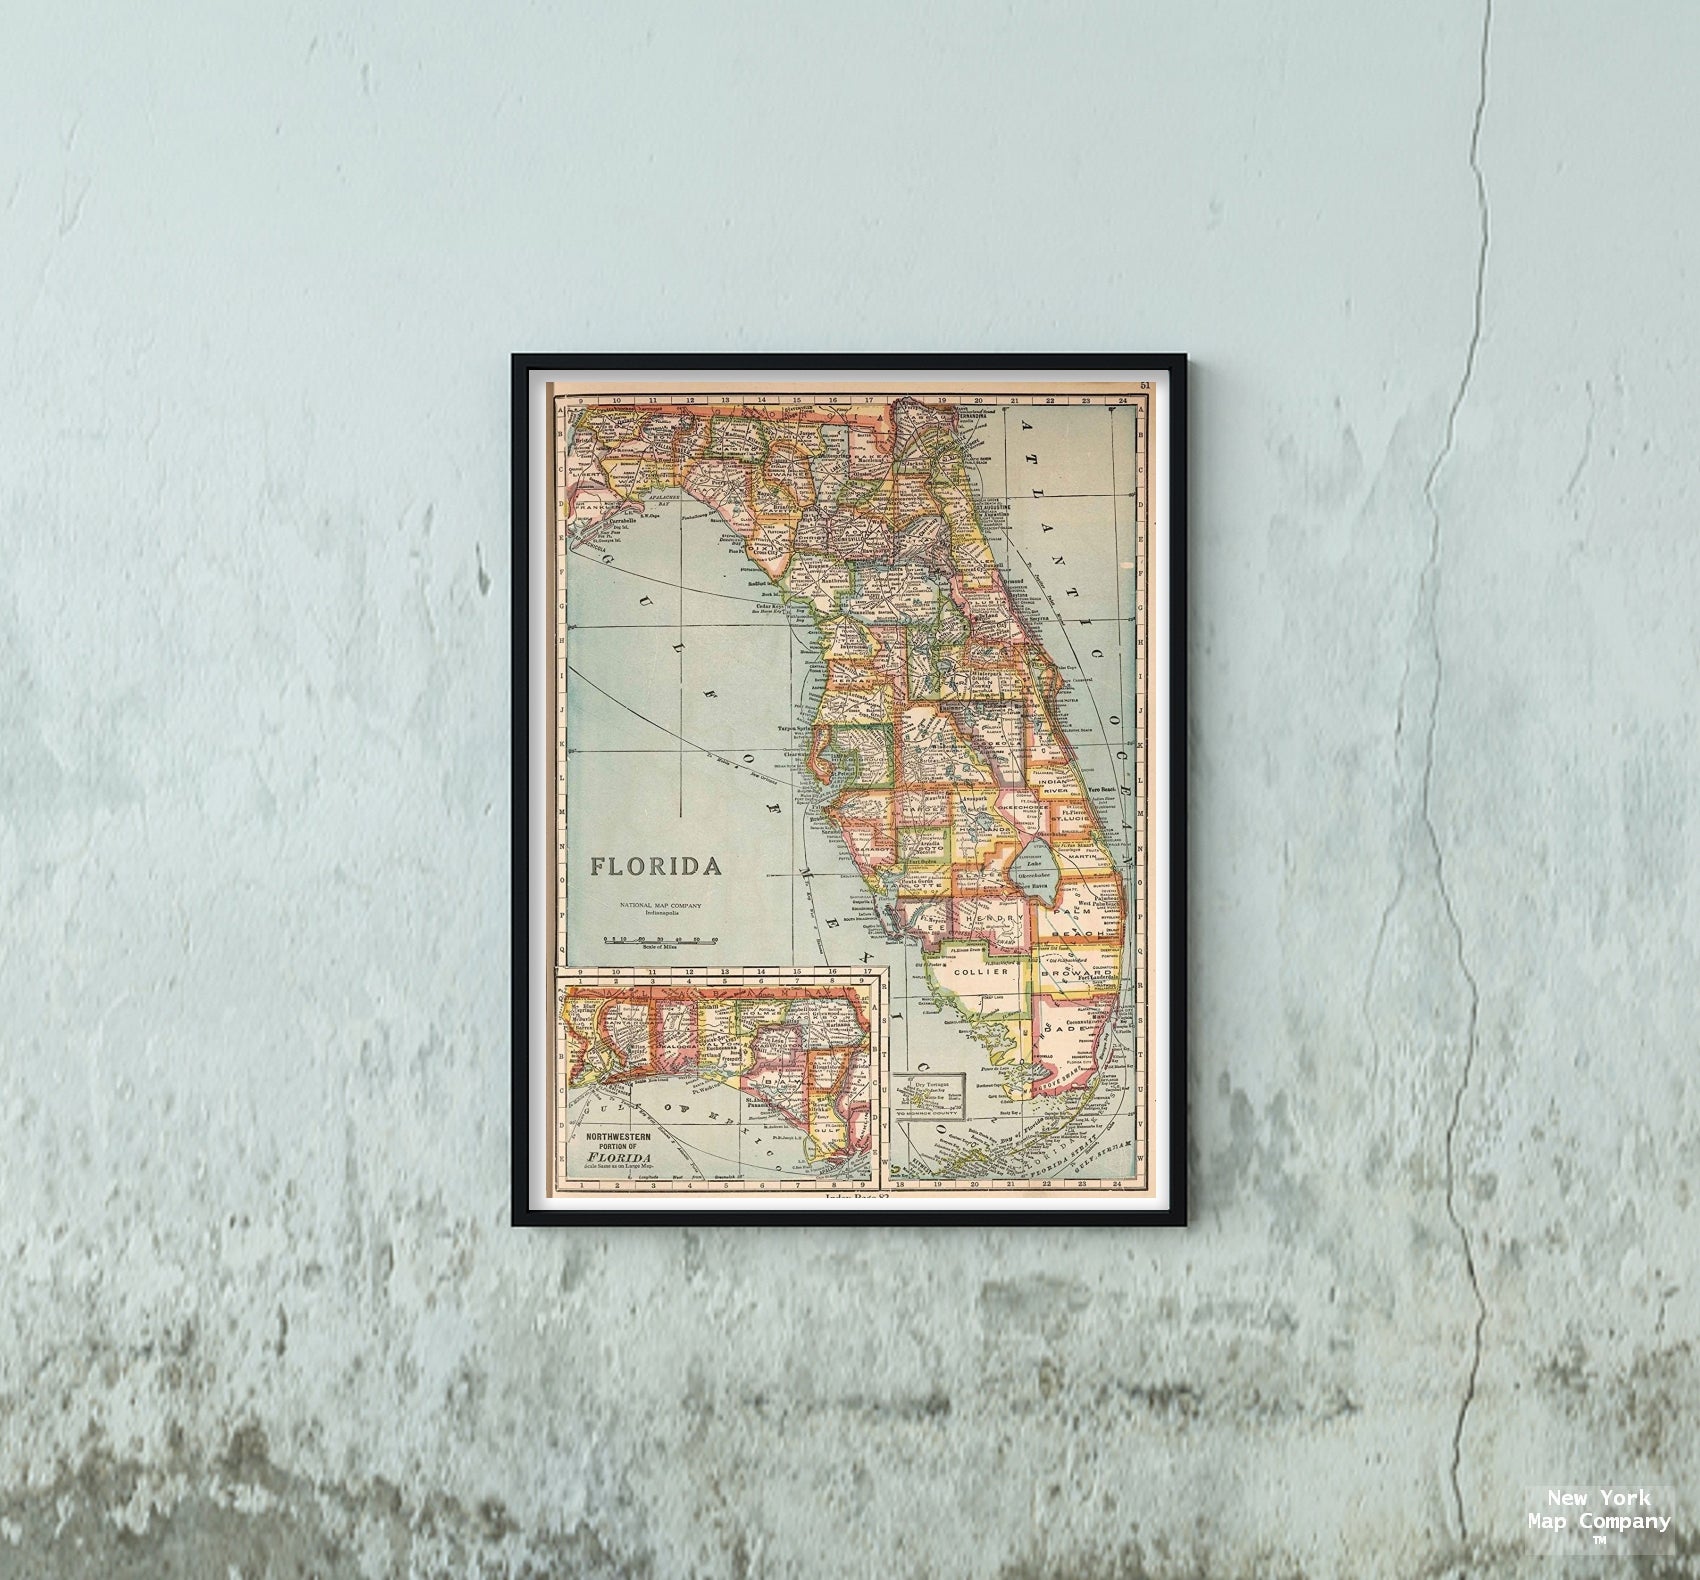 Florida. (Copyrighted by) National Map Company, Indianapolis. (inset map) Northwestern portion of Florida. (to accompany) Official Paved Road and Commercial Survey of the United States., Official Paved Road and Commercial Survey of the United States.